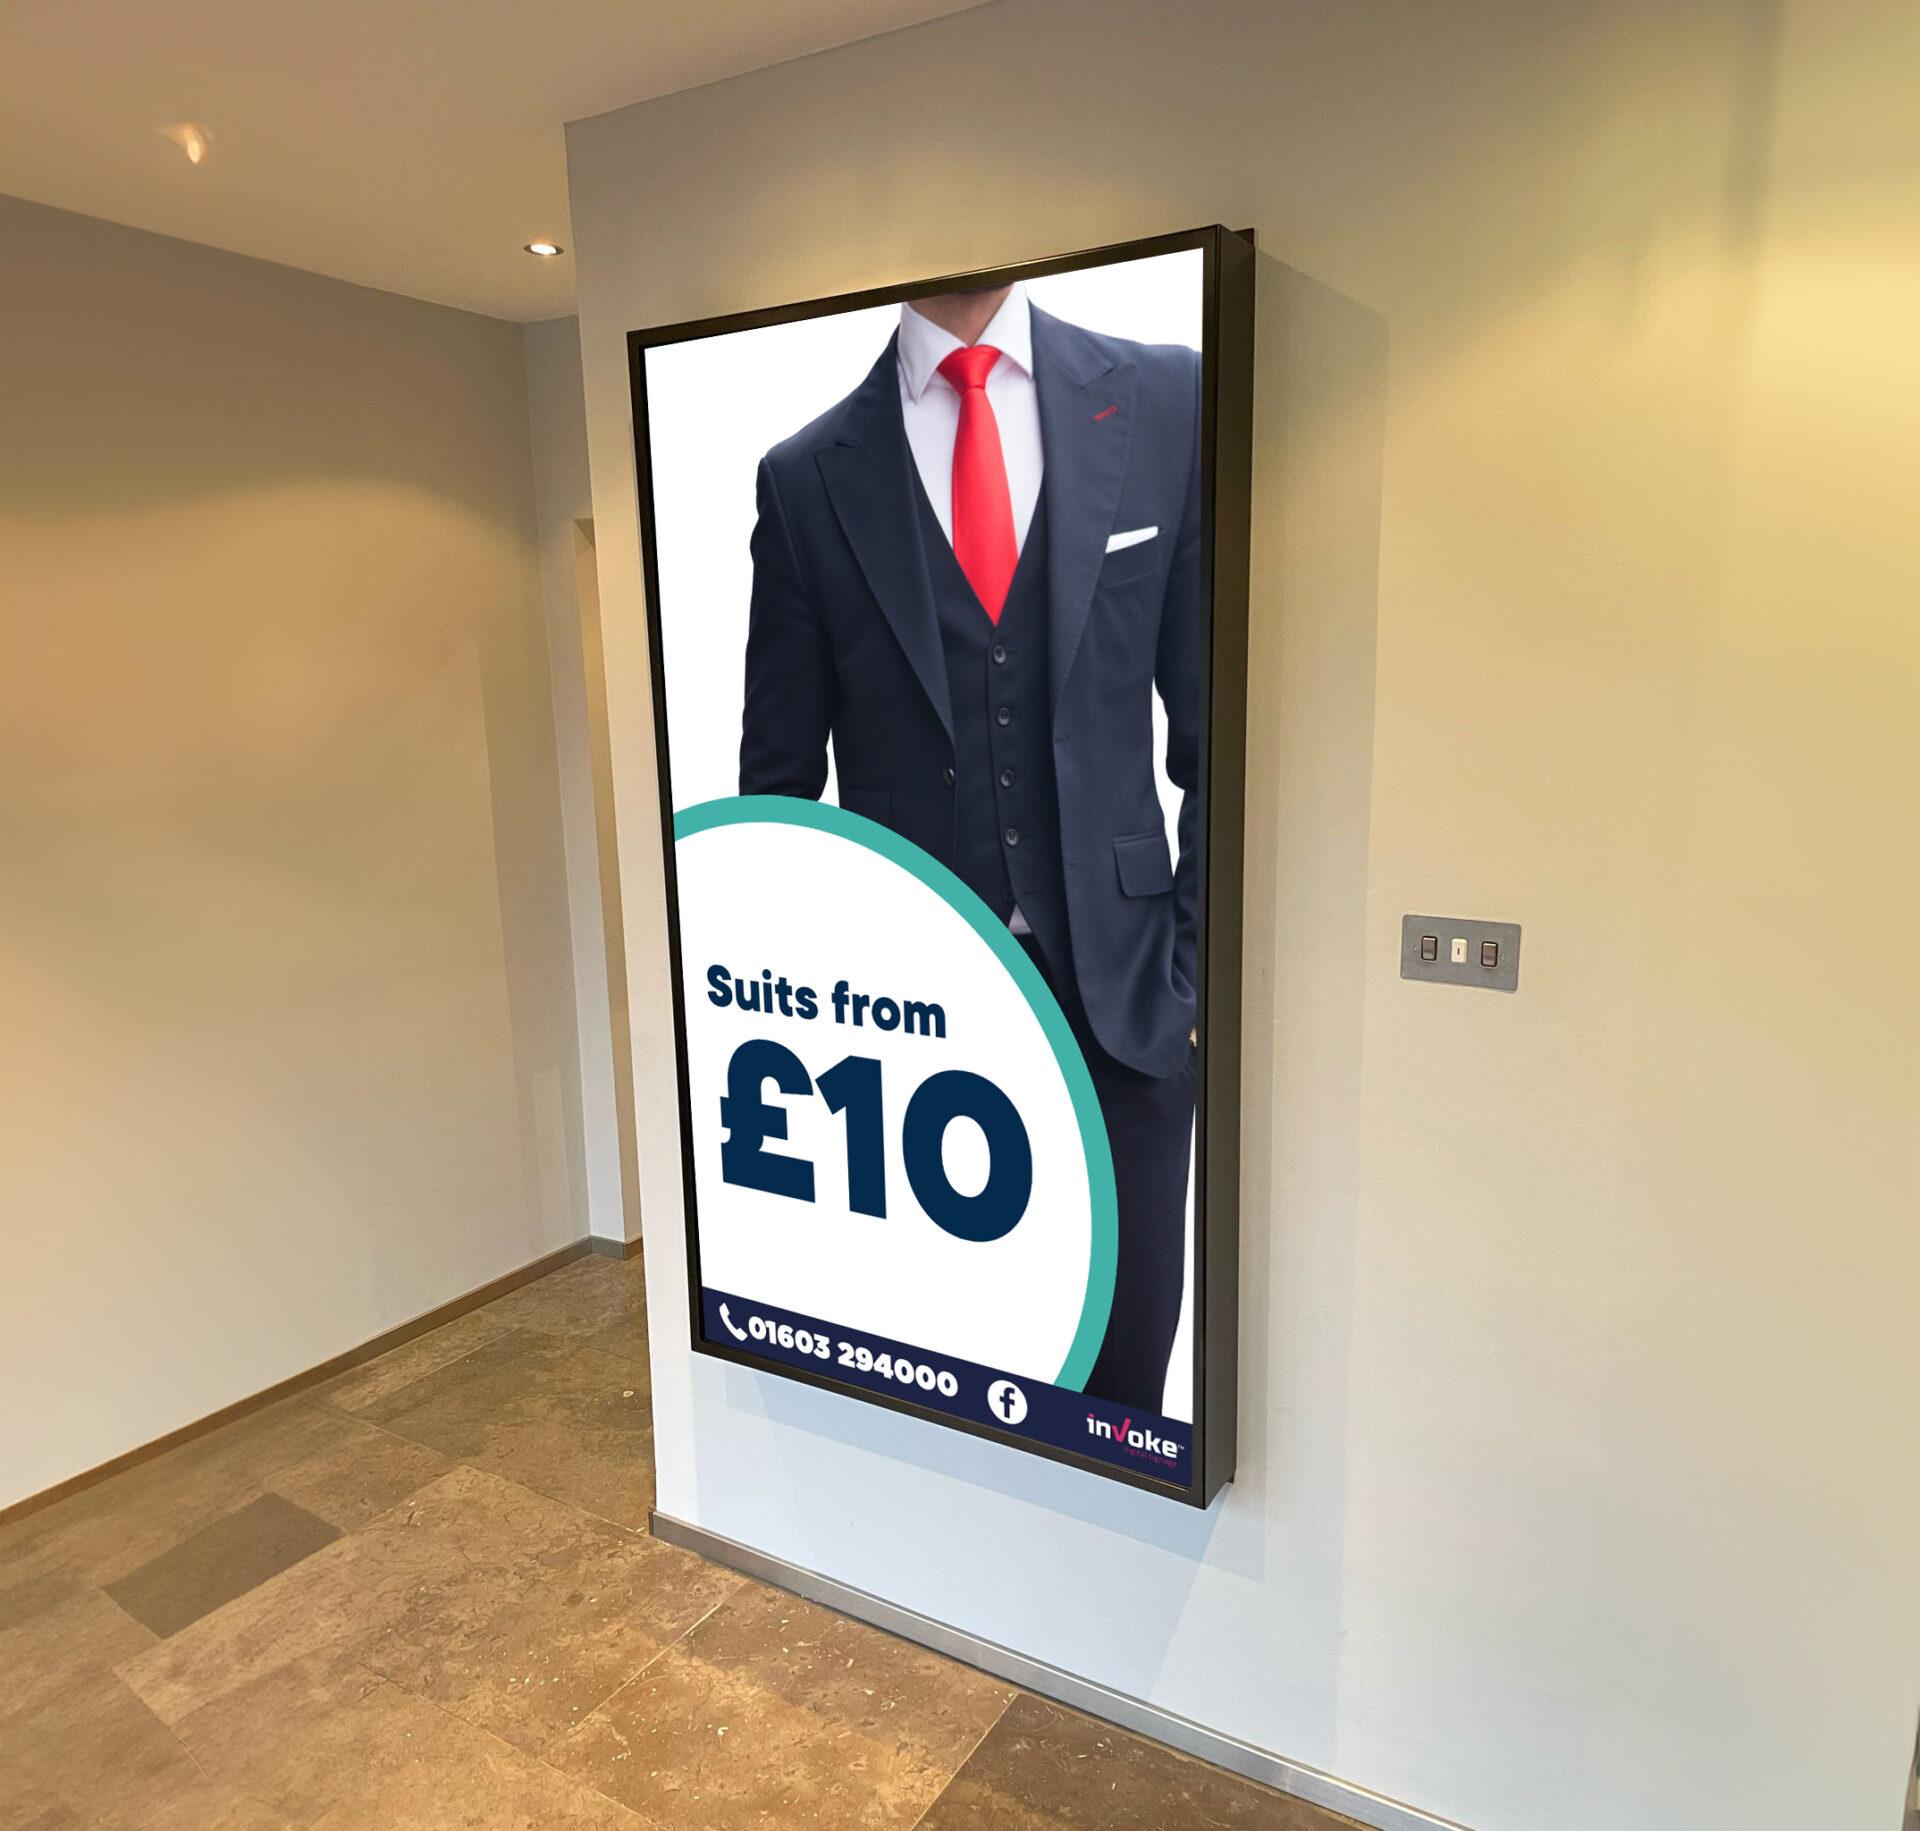 dry cleaners prices to clean suits advertised on internal screen